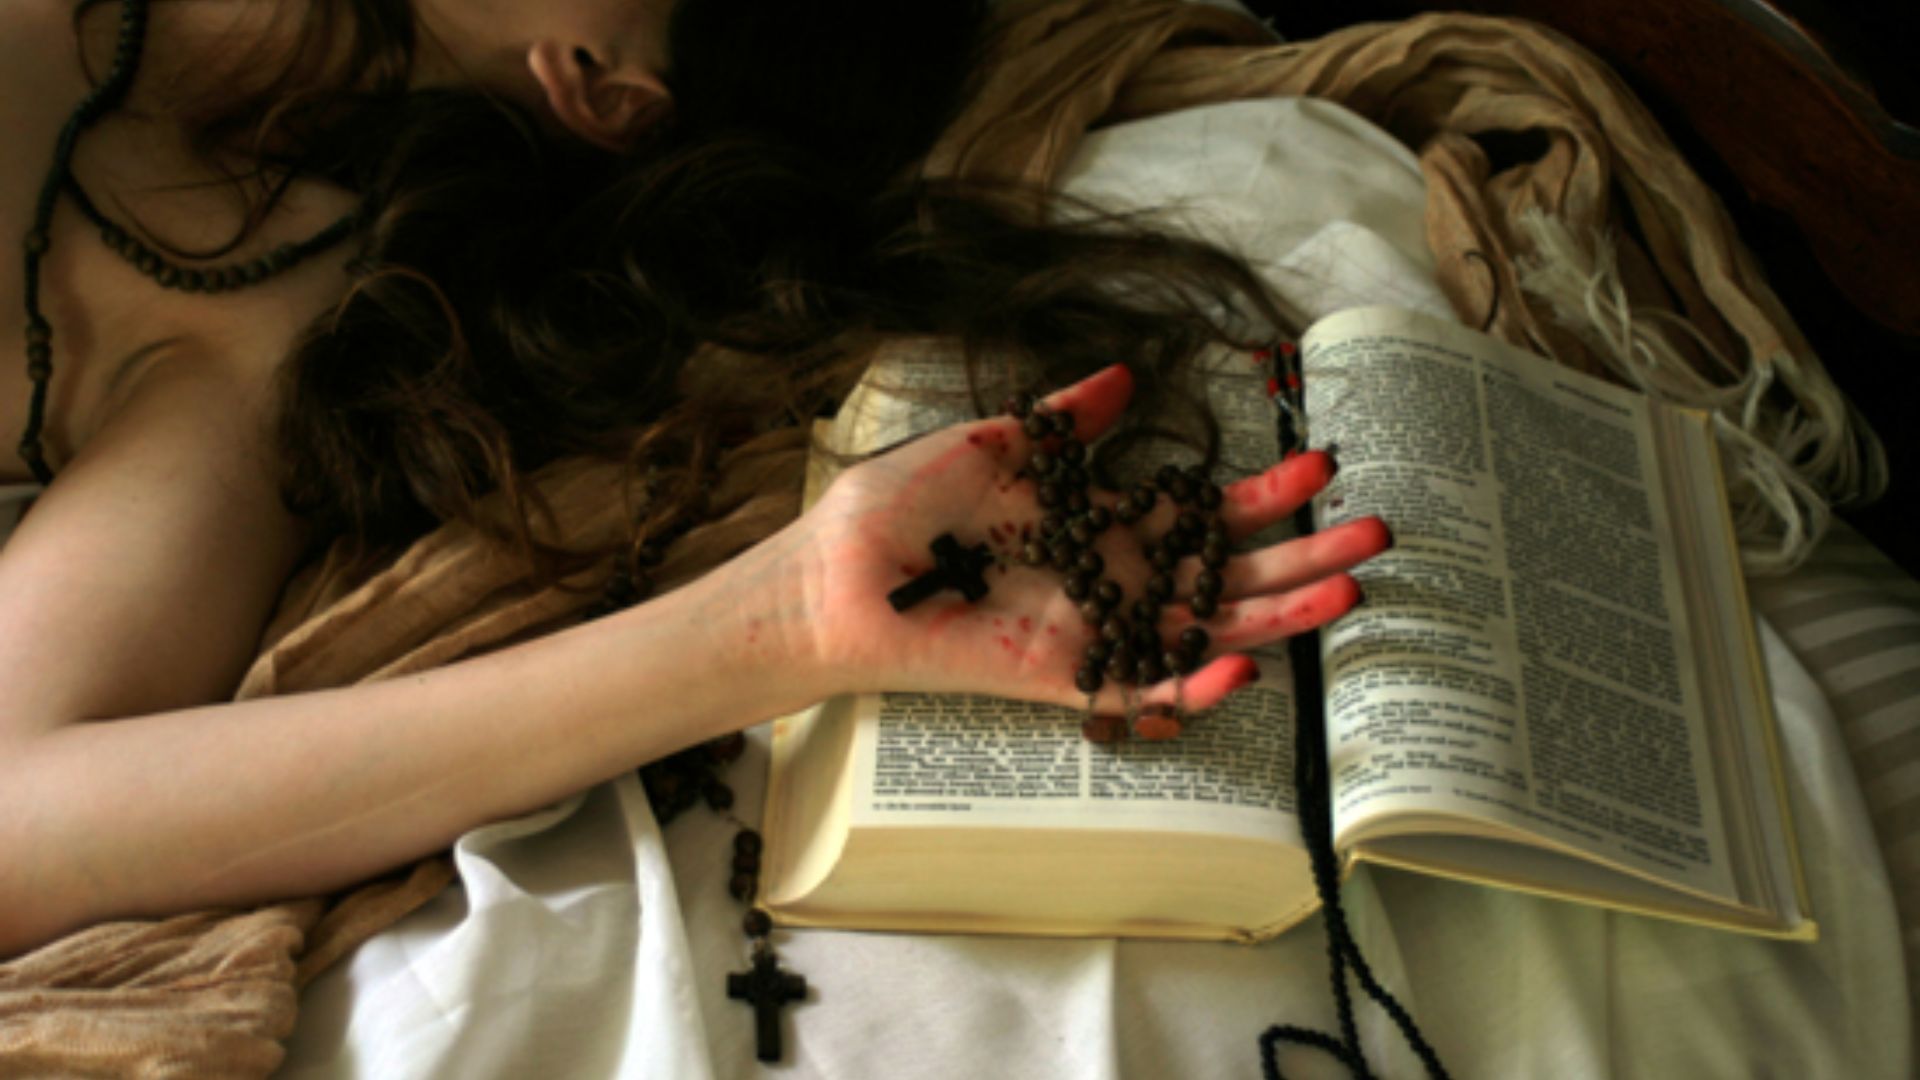 Girl With A Cross In Hand On Top Of A Bible